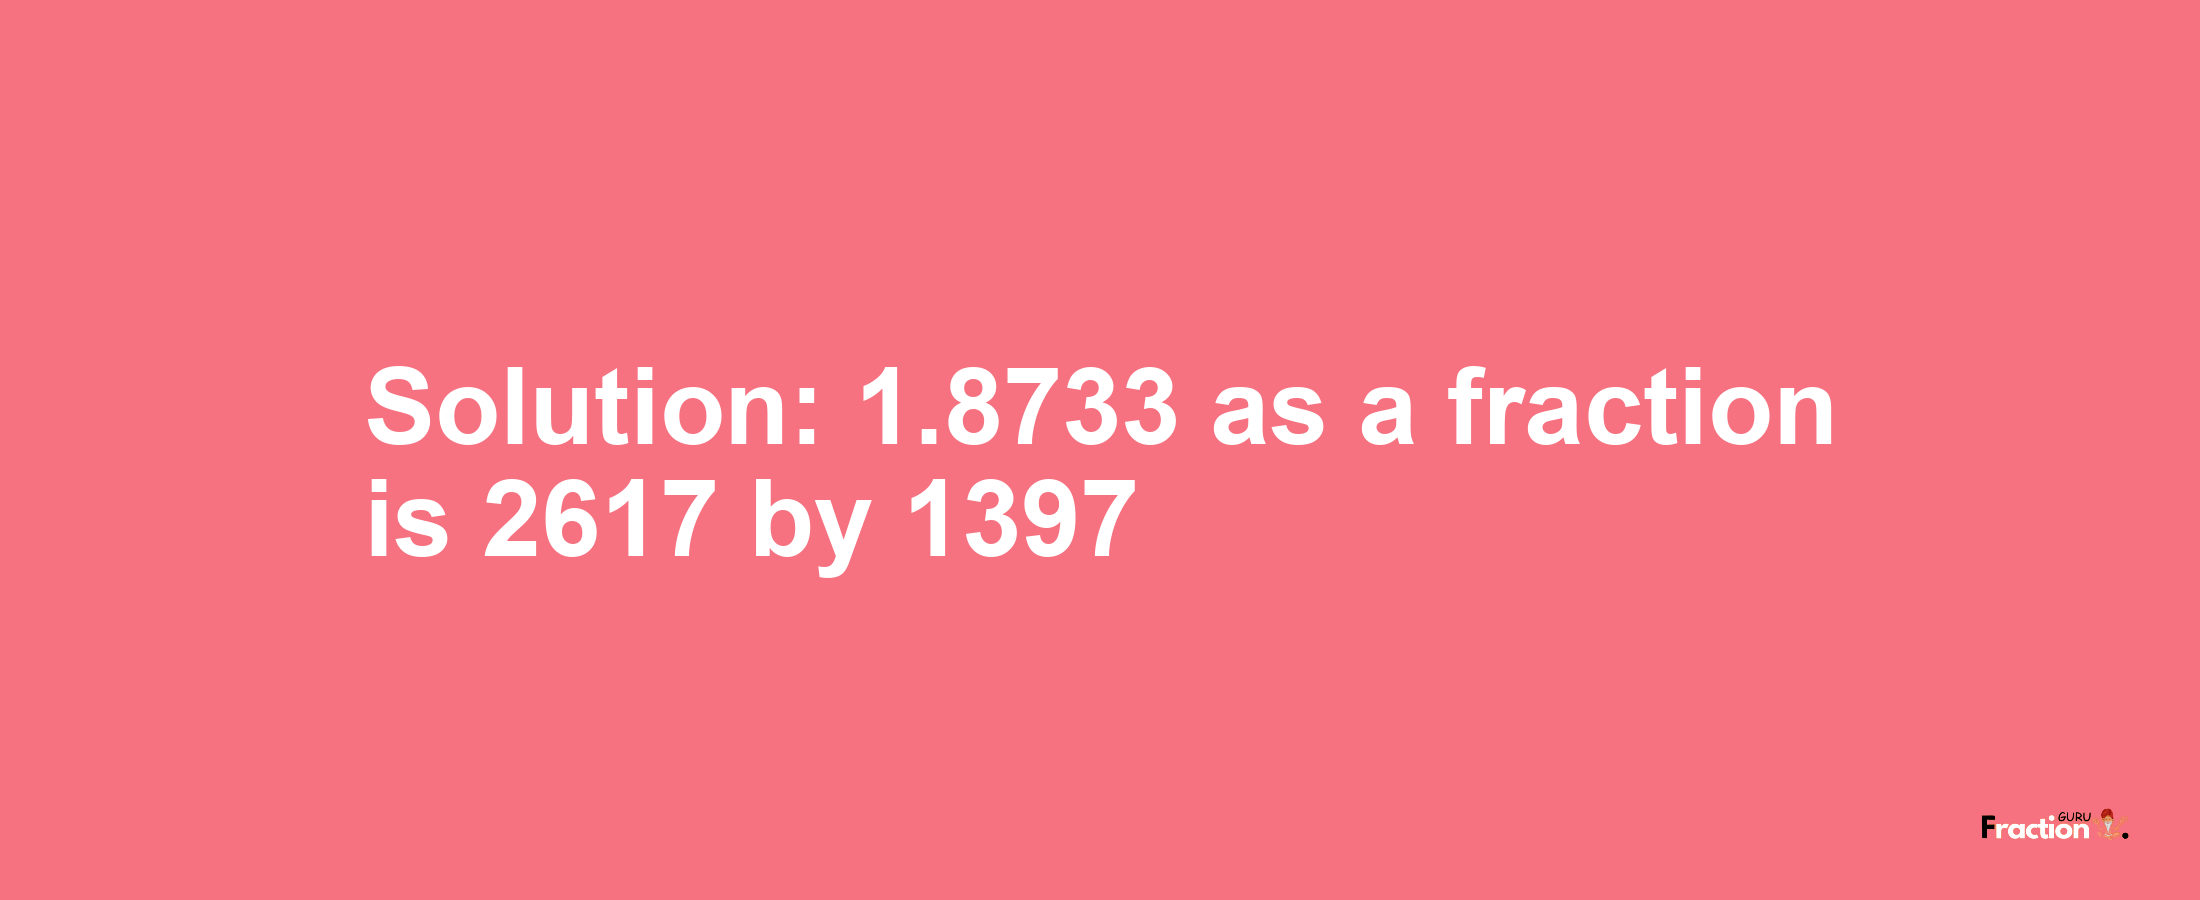 Solution:1.8733 as a fraction is 2617/1397